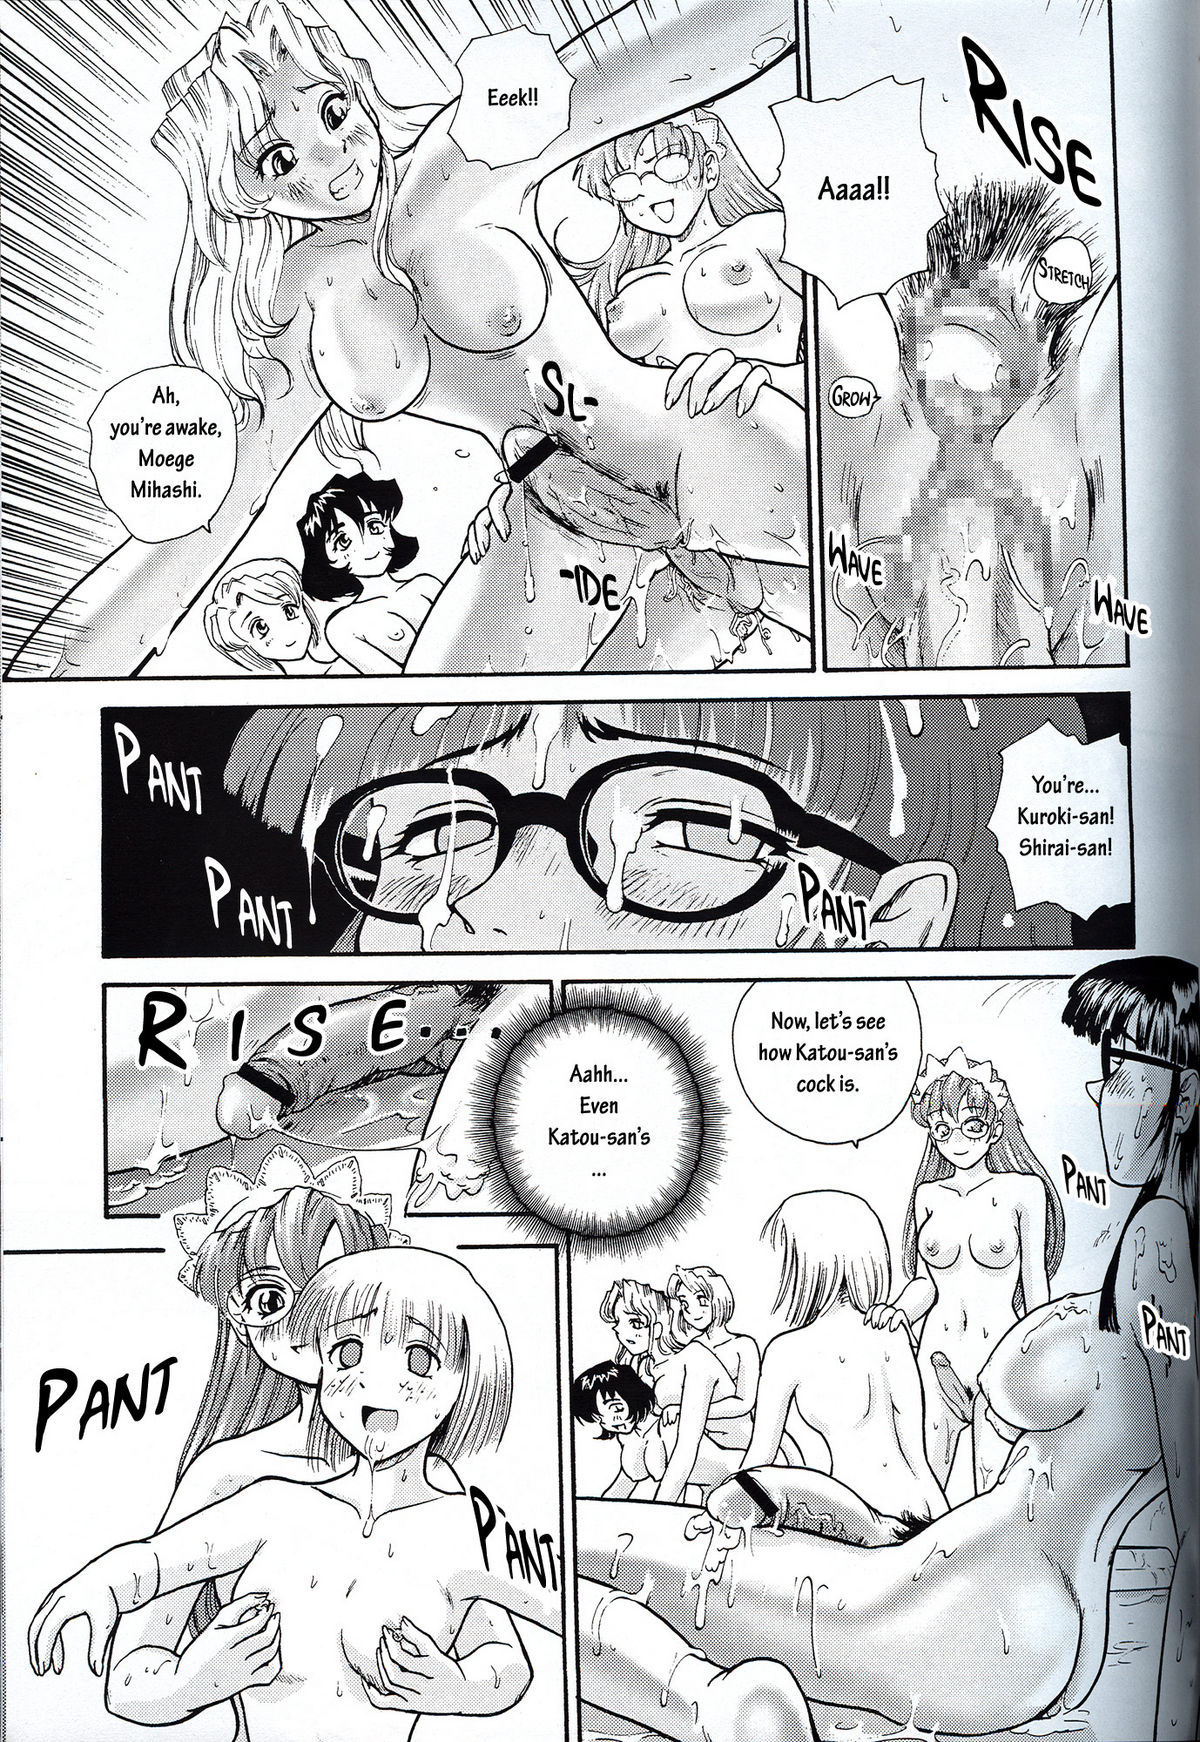 (SC19) [Behind Moon (Q)] Dulce Report 3 [English] page 22 full